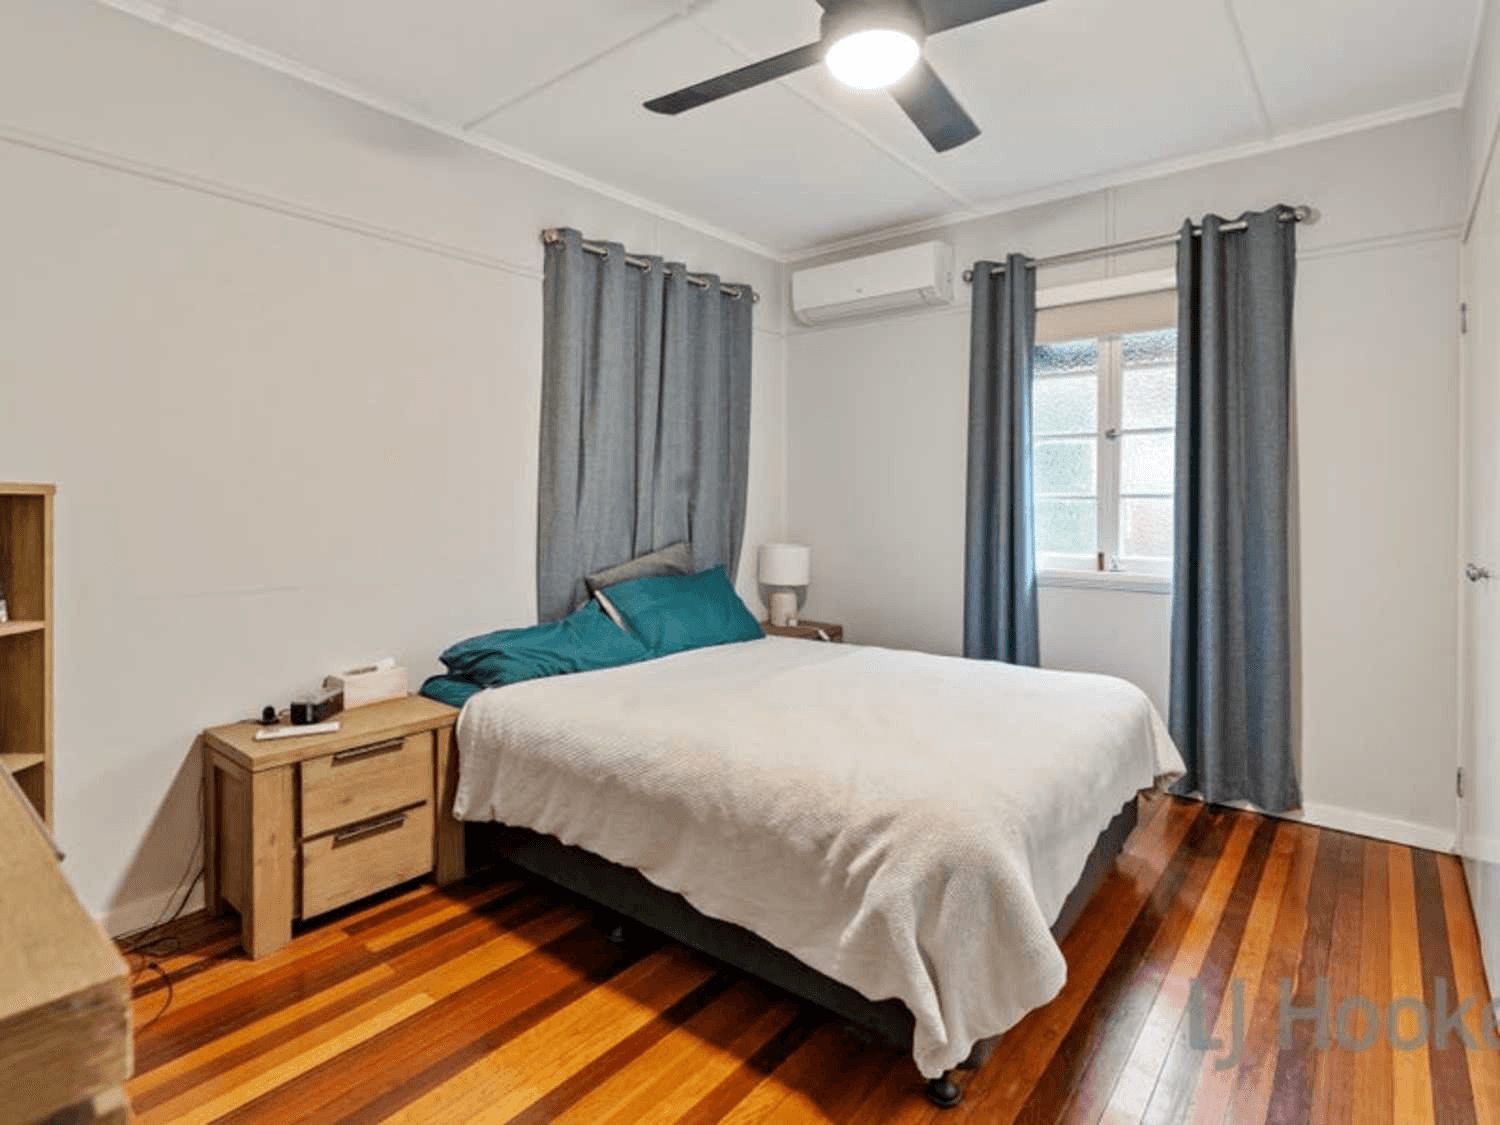 20 Goswell Street, Manly West, QLD 4179